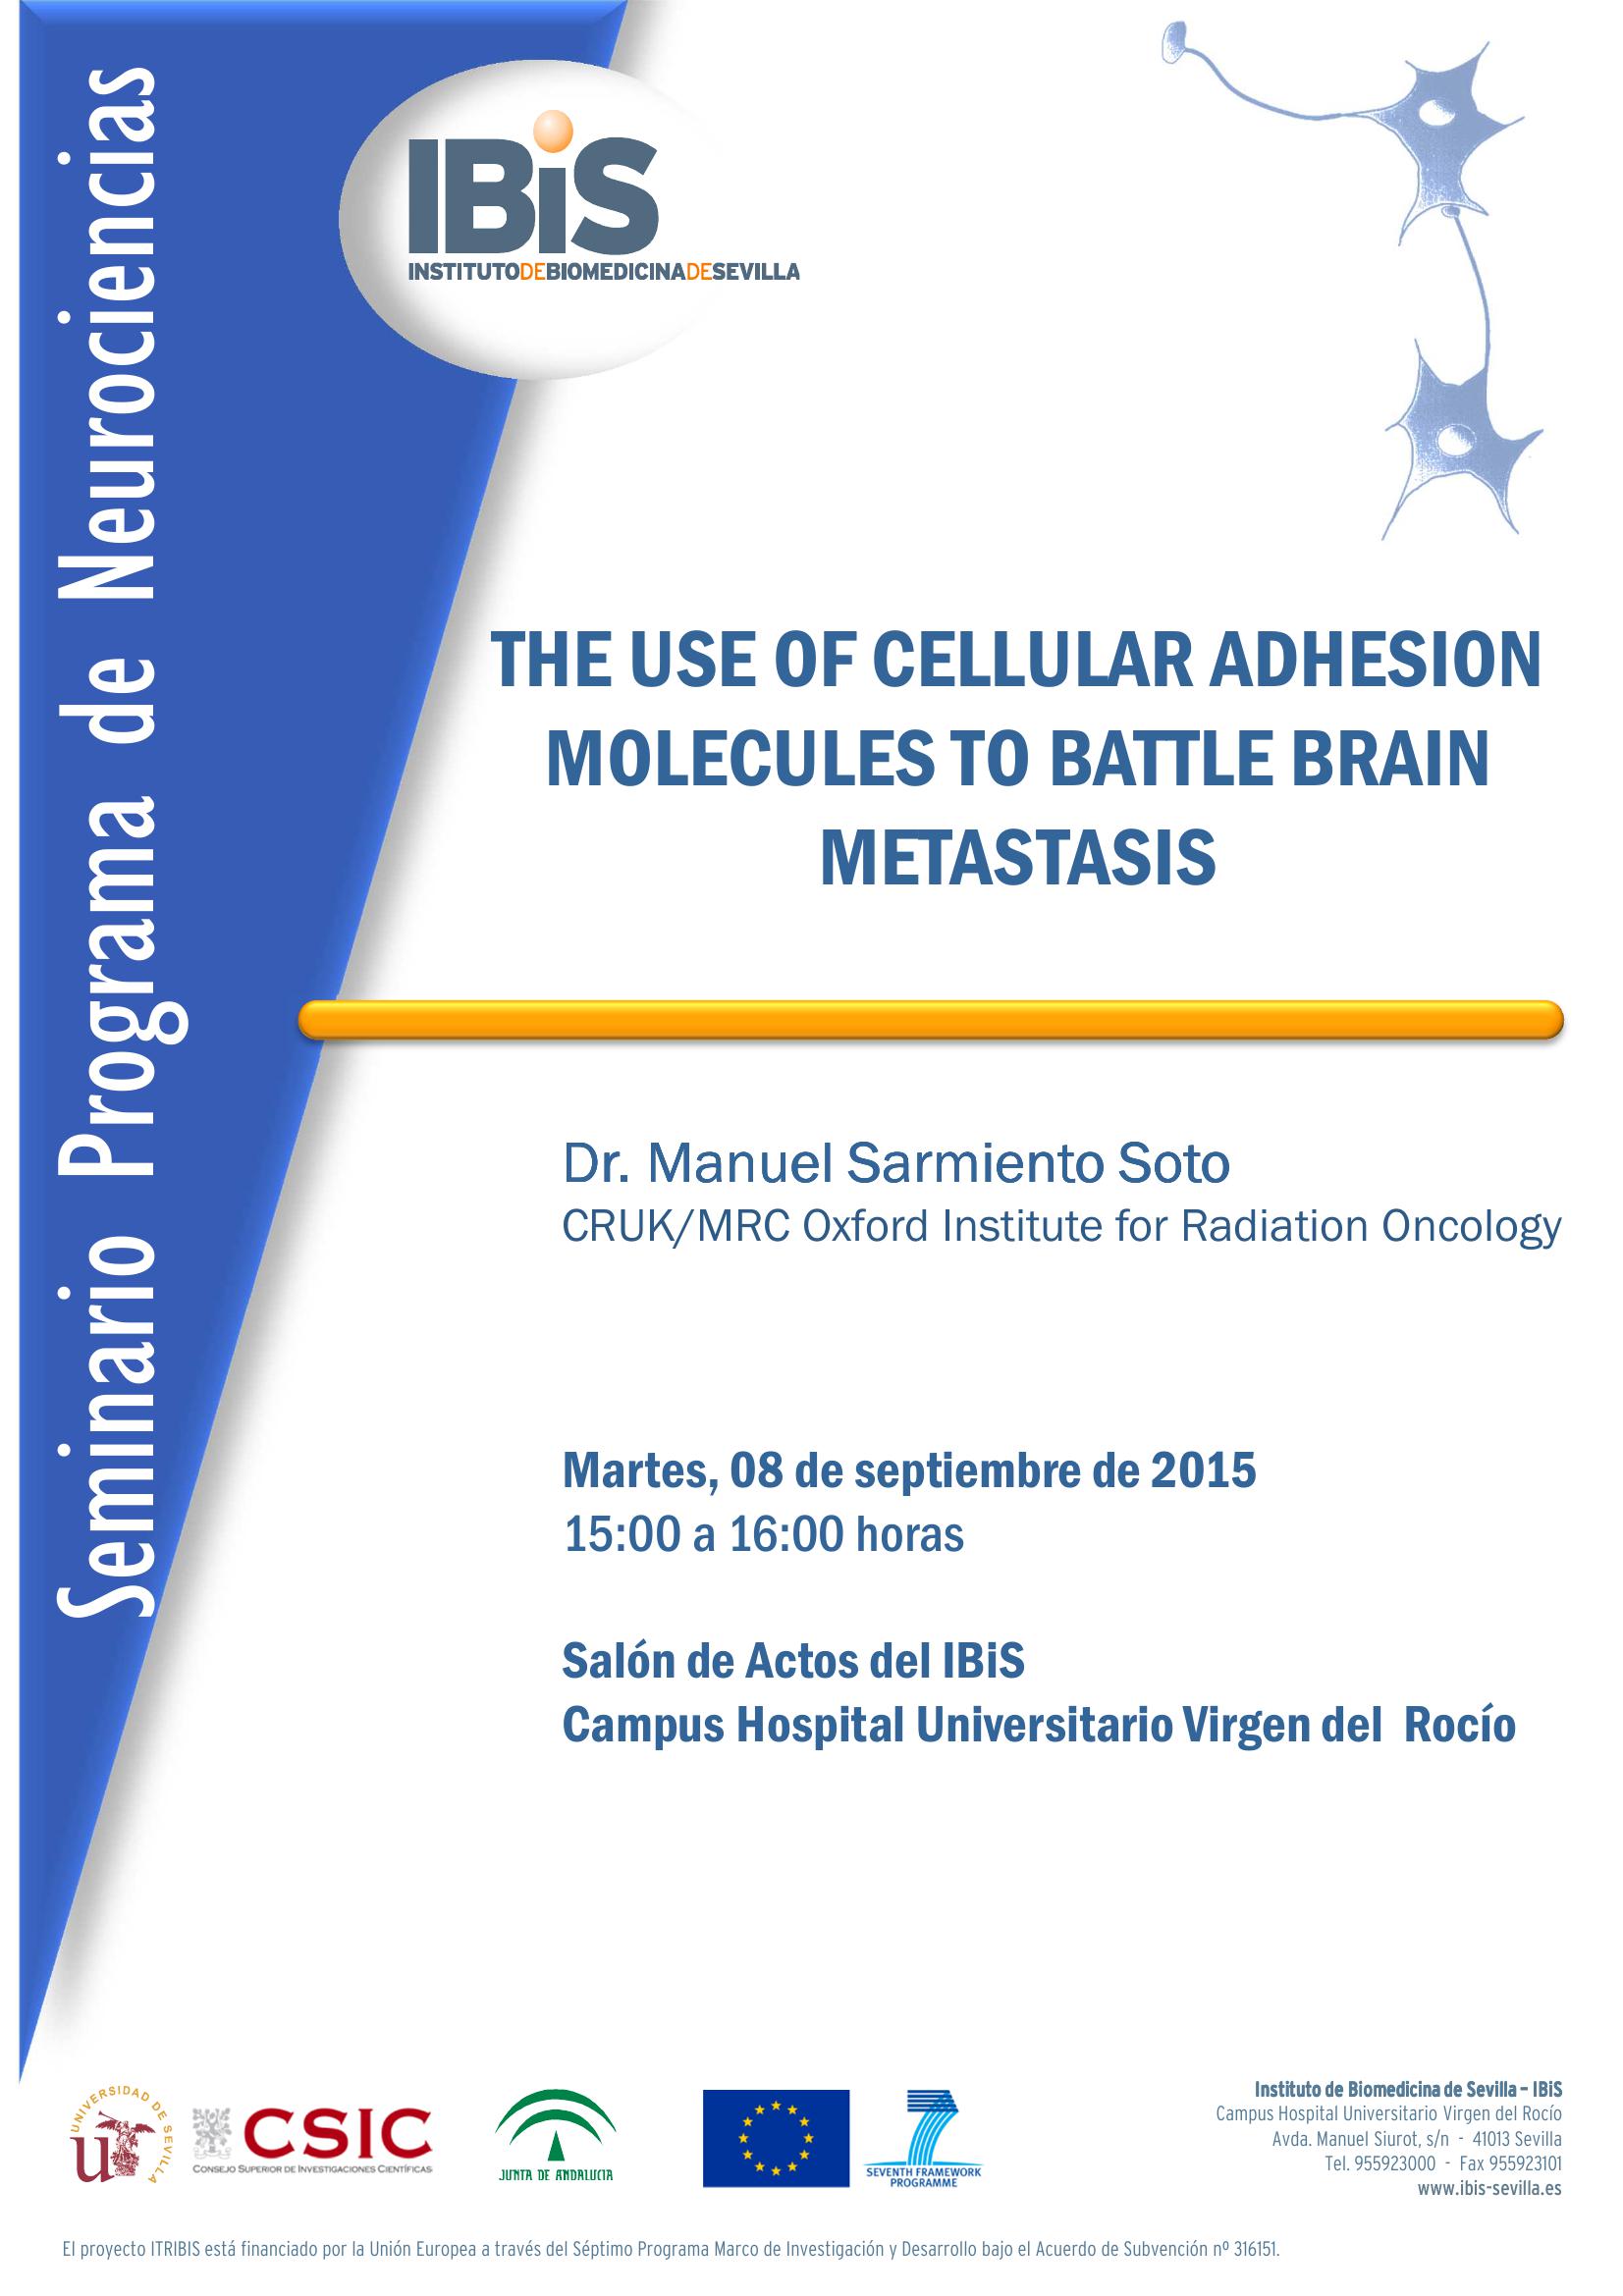 Poster: THE USE OF CELLULAR ADHESION MOLECULES TO BATTLE BRAIN METASTASIS